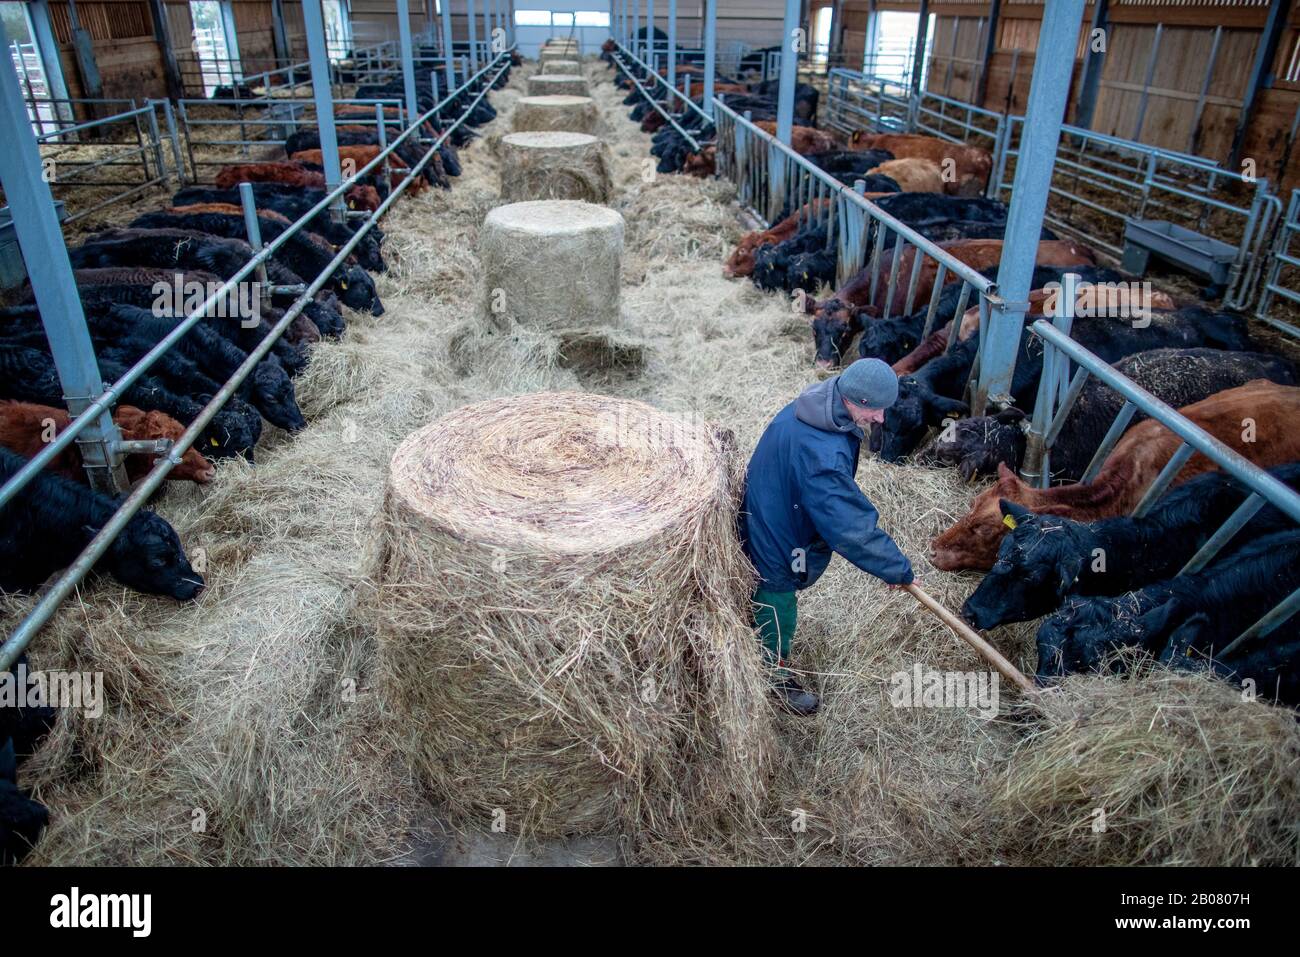 07 February 2020, Mecklenburg-Western Pomerania, Stintenburger Hütte: Employee Joachim Grunert works in the new stable of the Ark Farm Domäne Knesse and feeds the animals. Around 150 animals are kept as beef cattle in the Lebenshilfewerk Hagenow farm. The Arche-Hof offers disabled people 22 residential and 30 jobs, mainly in its own organic farm. The focus is on working with animals and promoting a special environmental awareness on an organic farm. Photo: Jens Büttner/dpa-Zentralbild/ZB Stock Photo